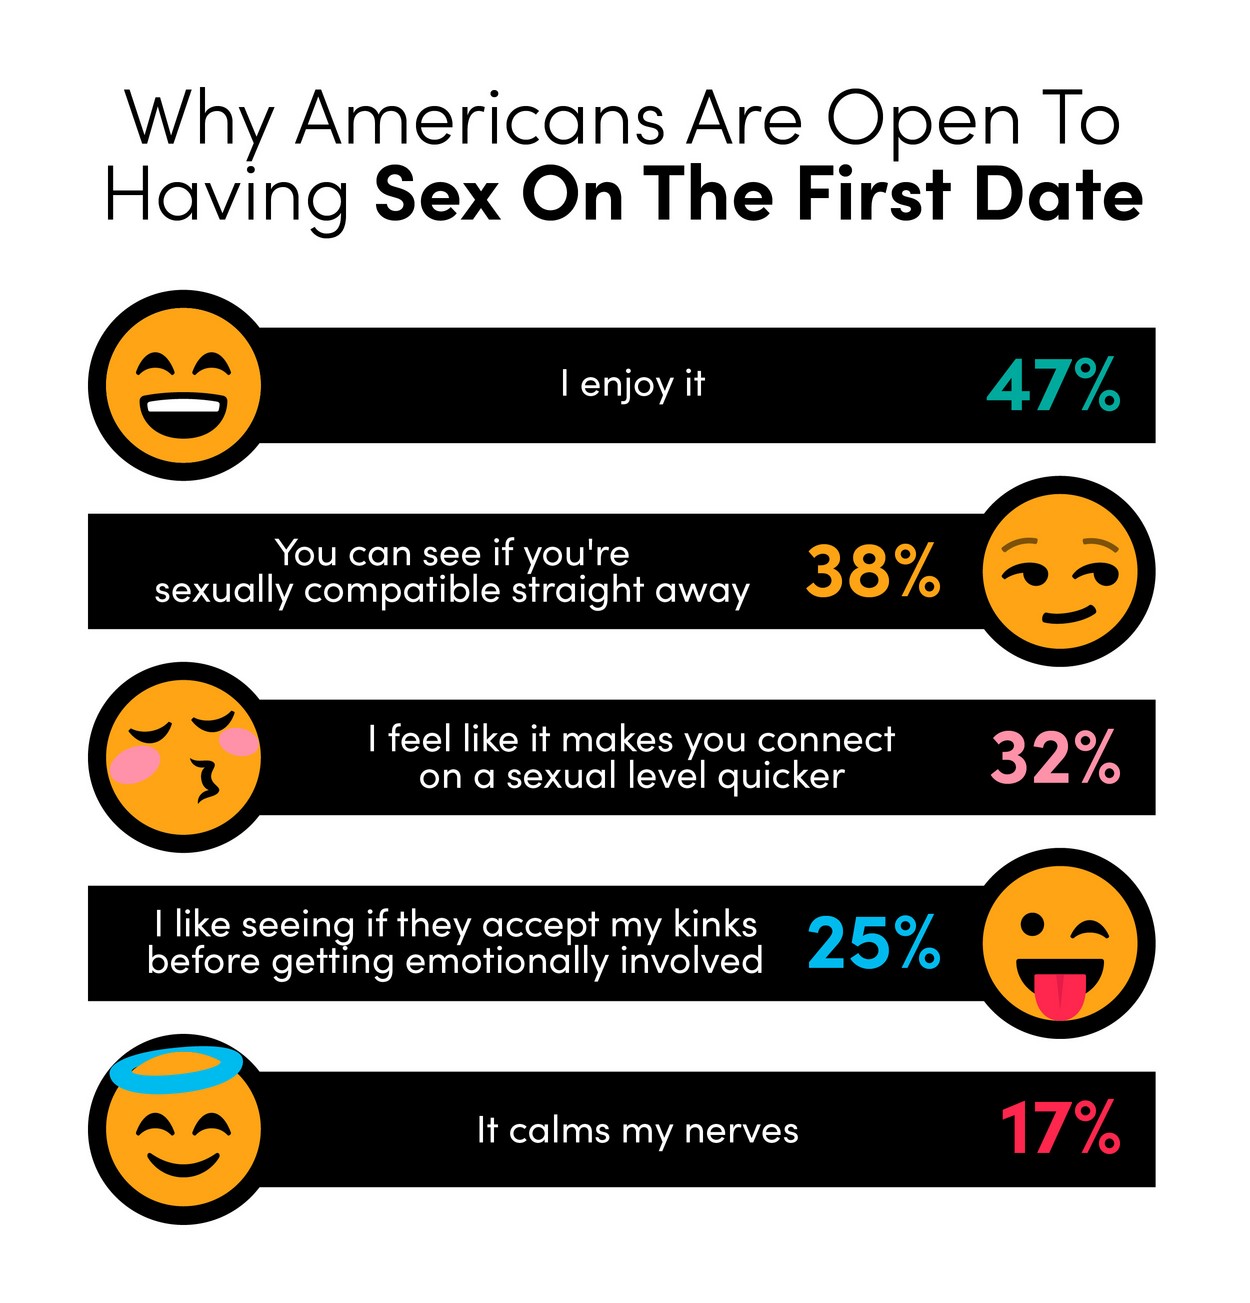 Why are Americans open to sex on a first date?